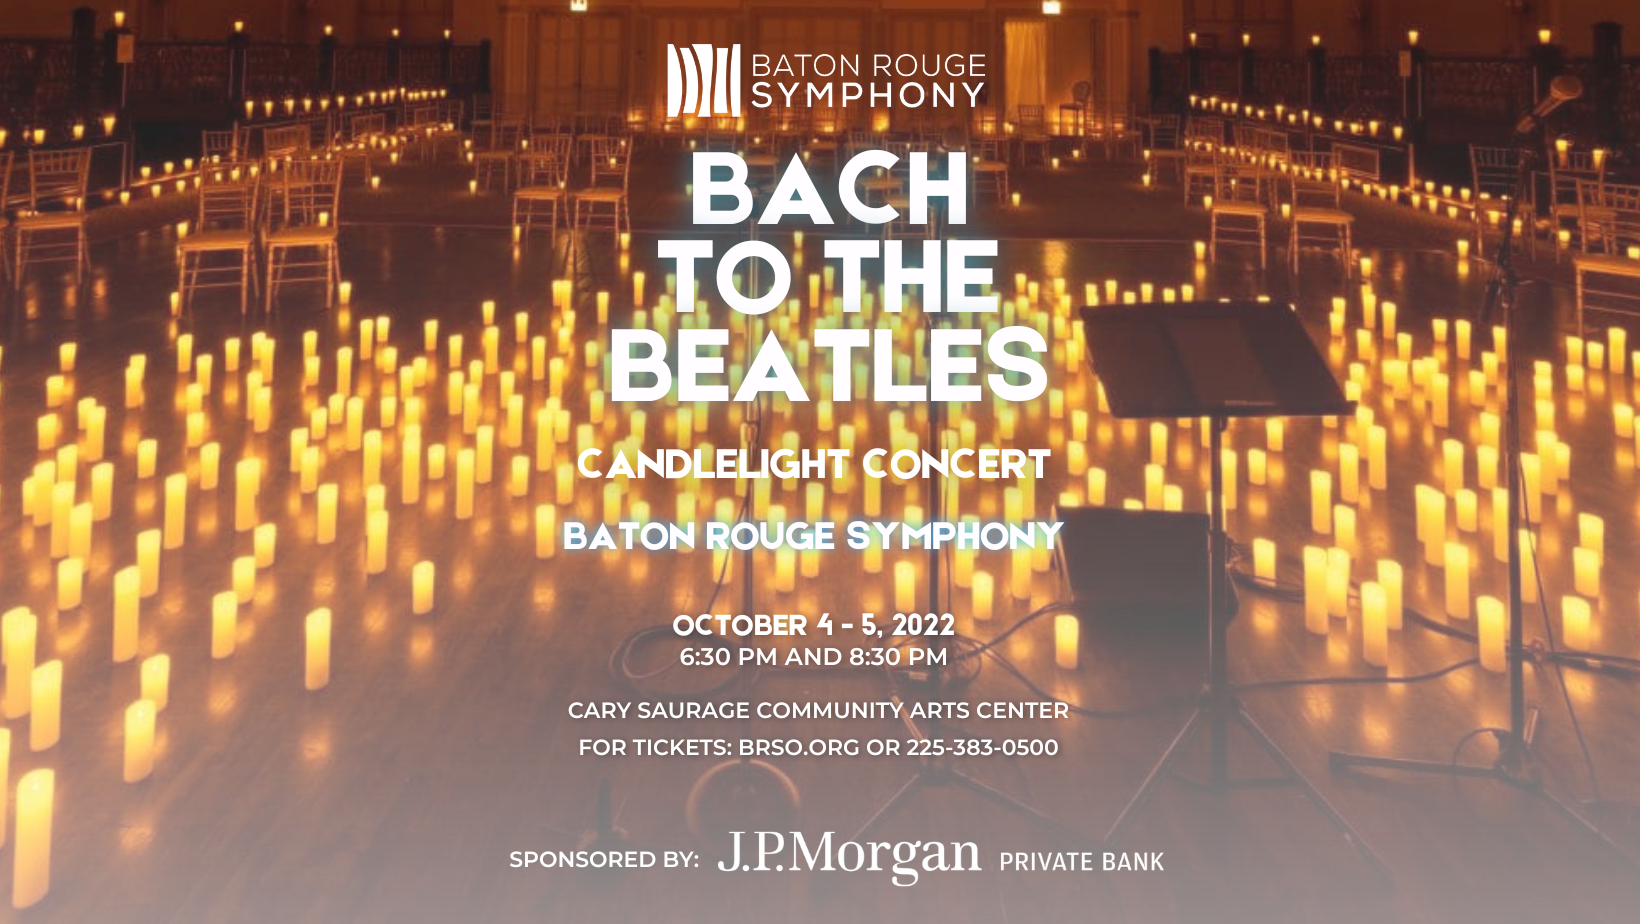 Candlelight Concert Bach To The